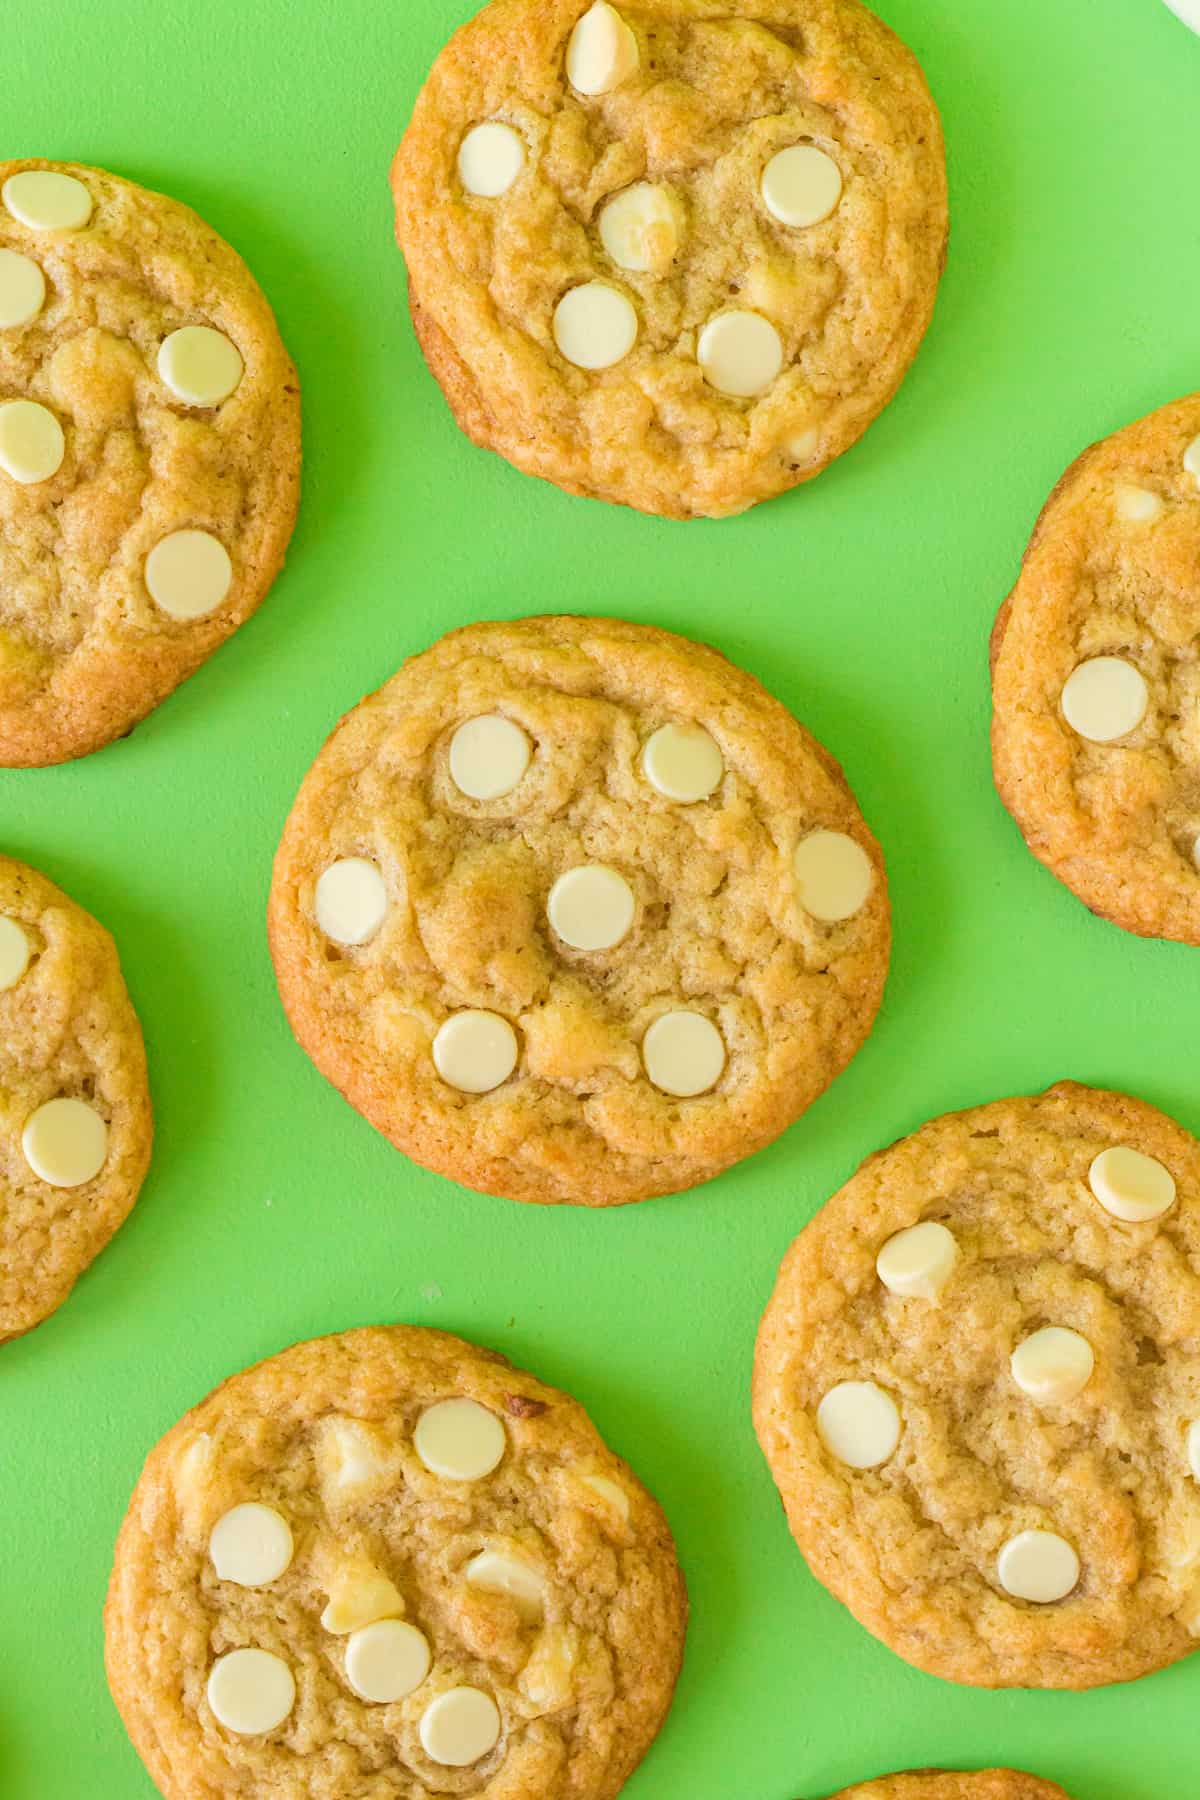 Banana Cookies with White Chocolate Chips on green background.